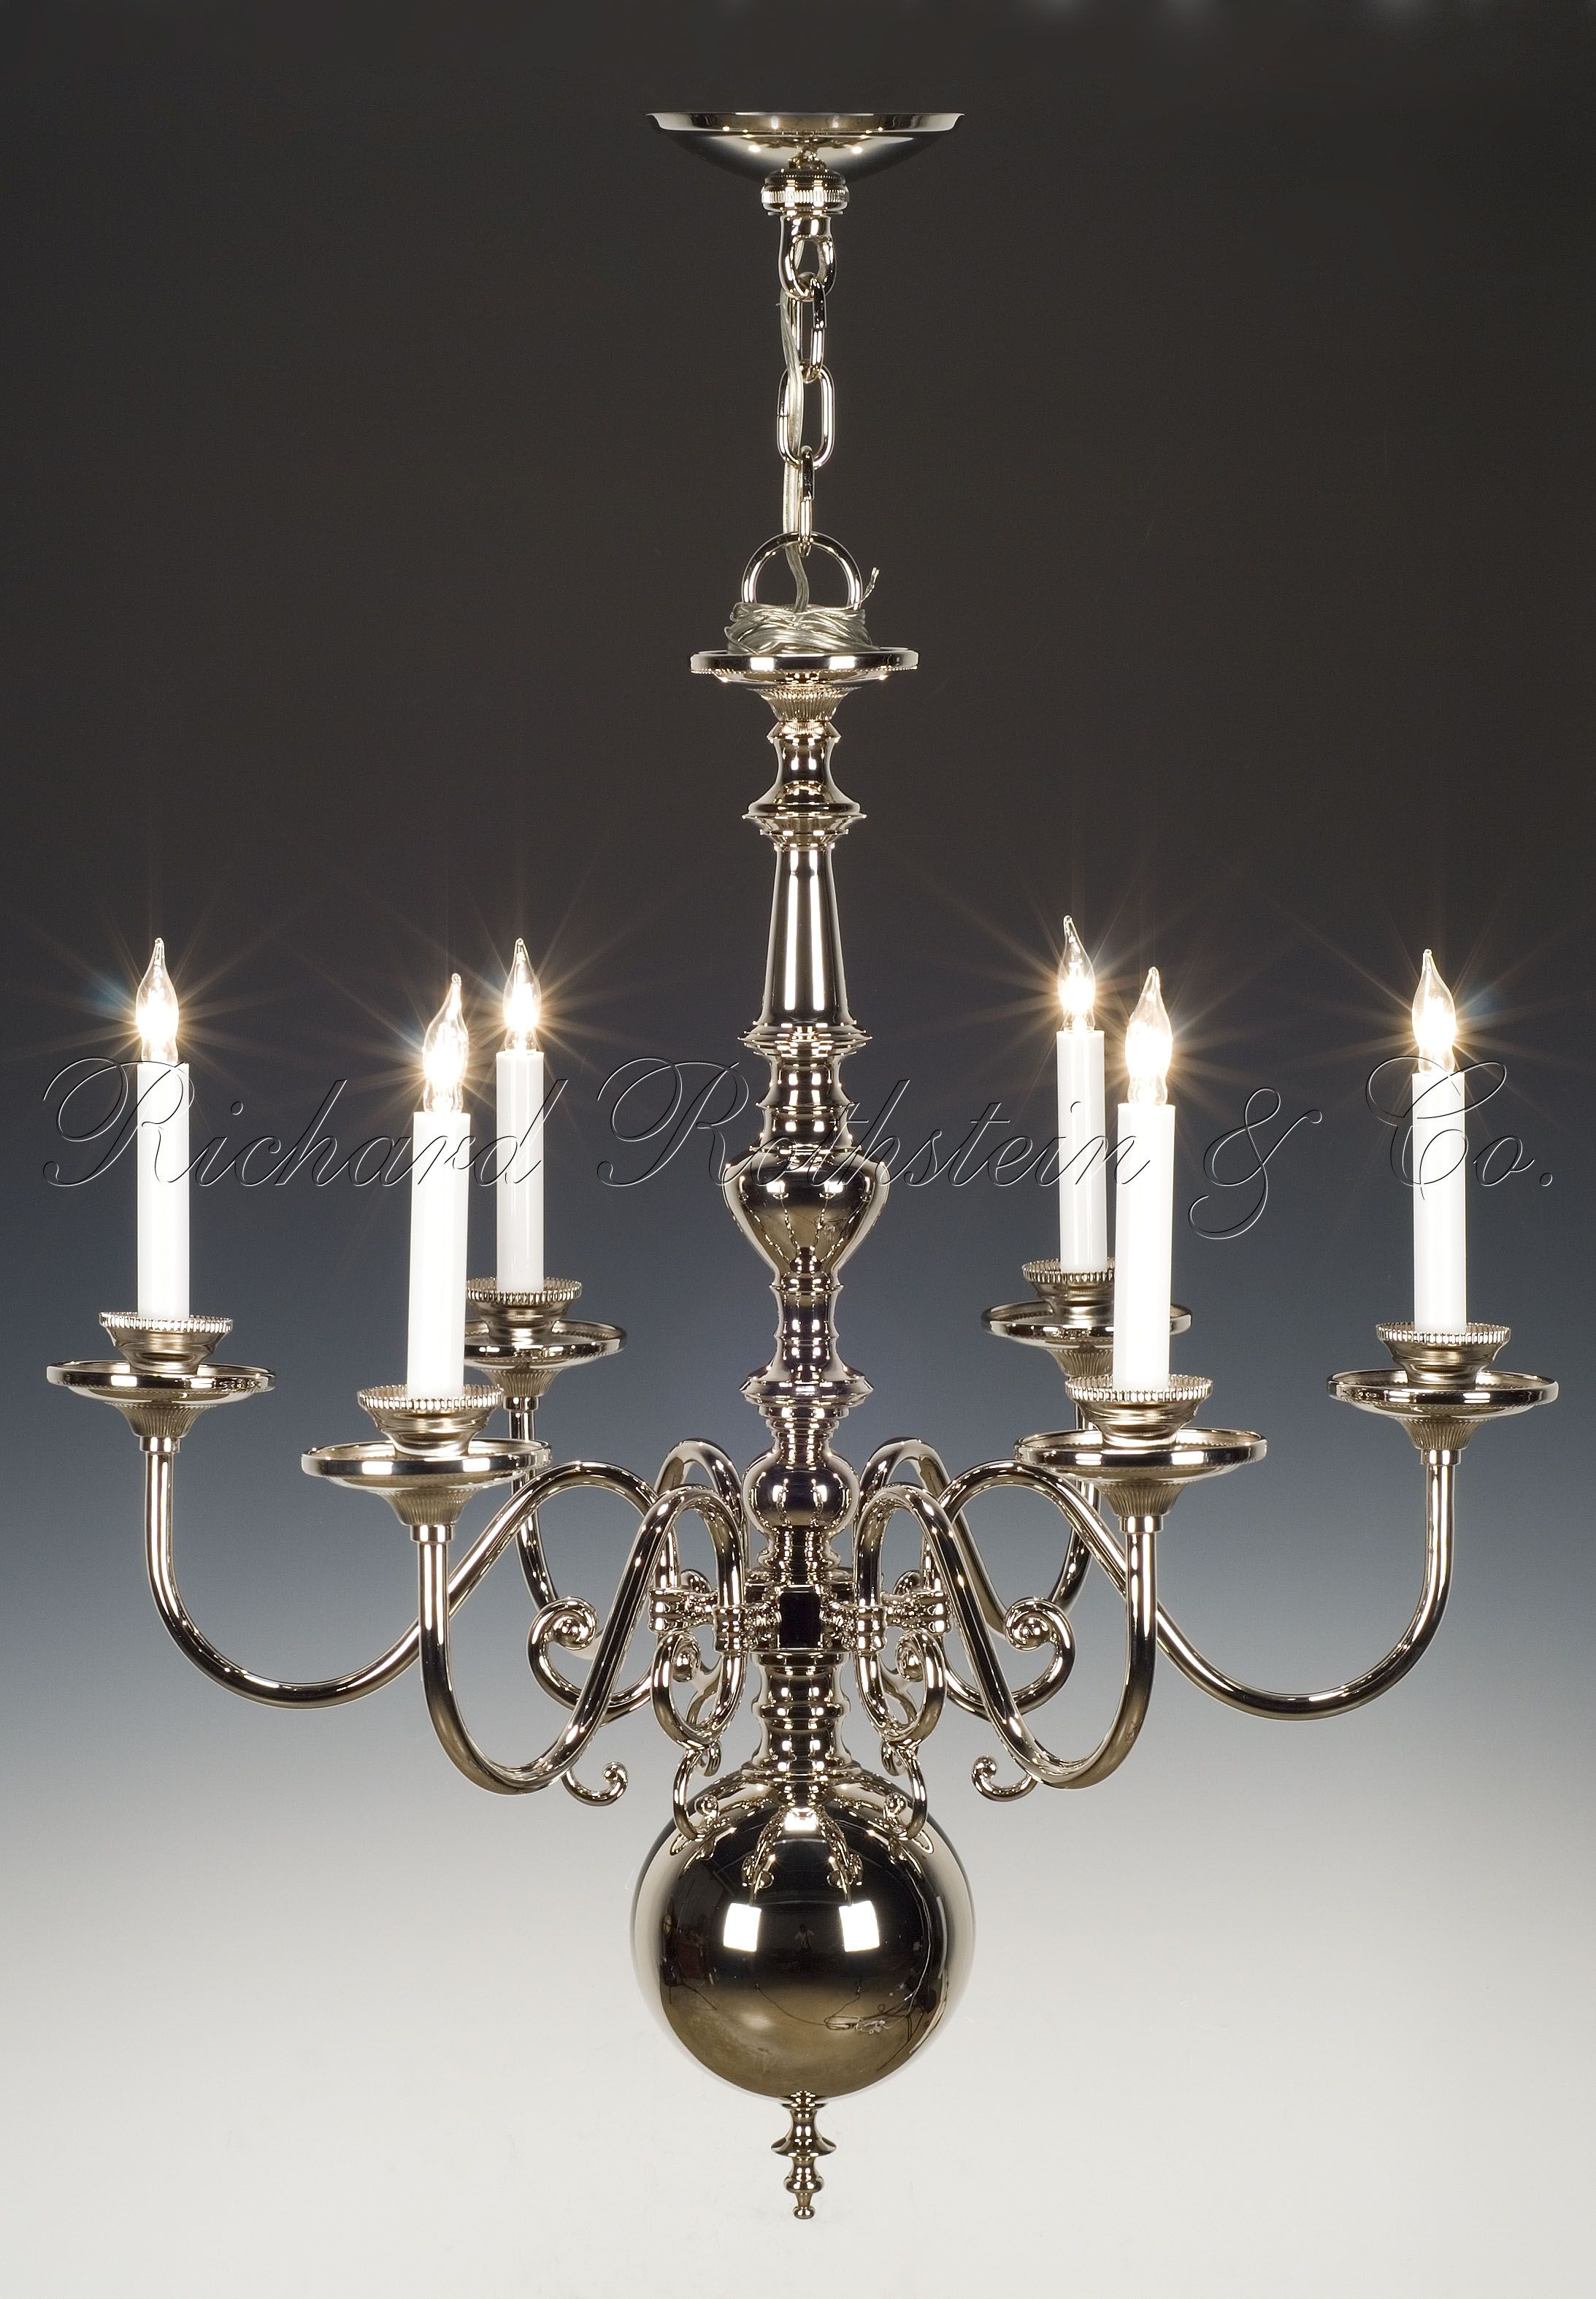 Silver Chandeliers For Bedrooms Chandeliers Chic Round Flush Intended For Silver Chandeliers (View 8 of 15)